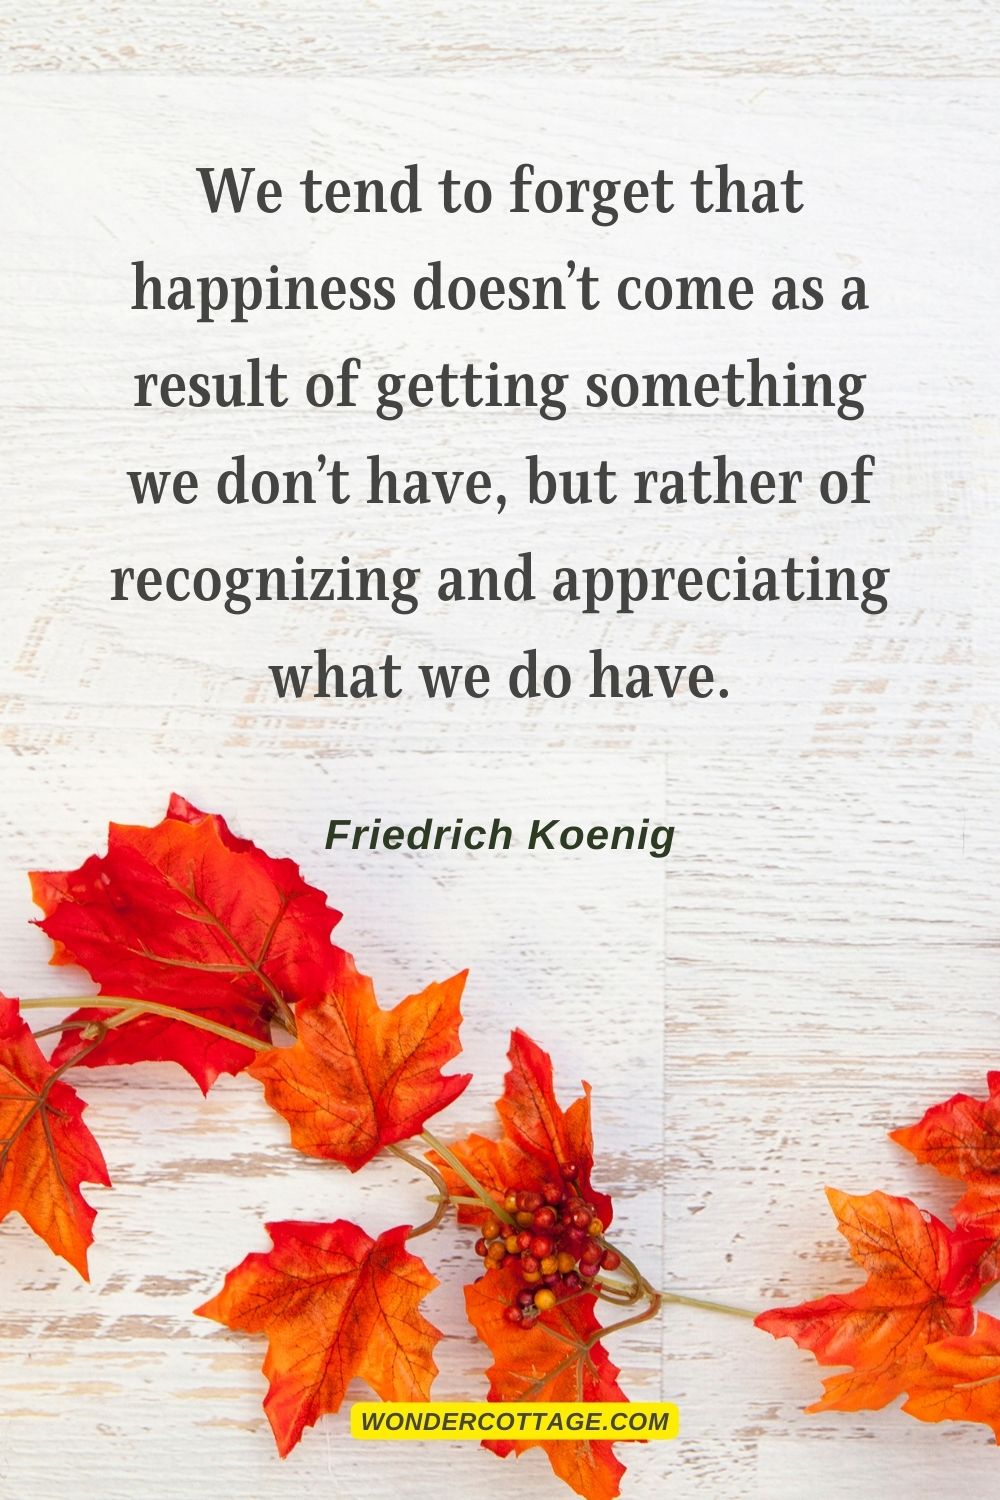 We tend to forget that happiness doesn’t come as a result of getting something we don’t have, but rather of recognizing and appreciating what we do have. Friedrich Koenig